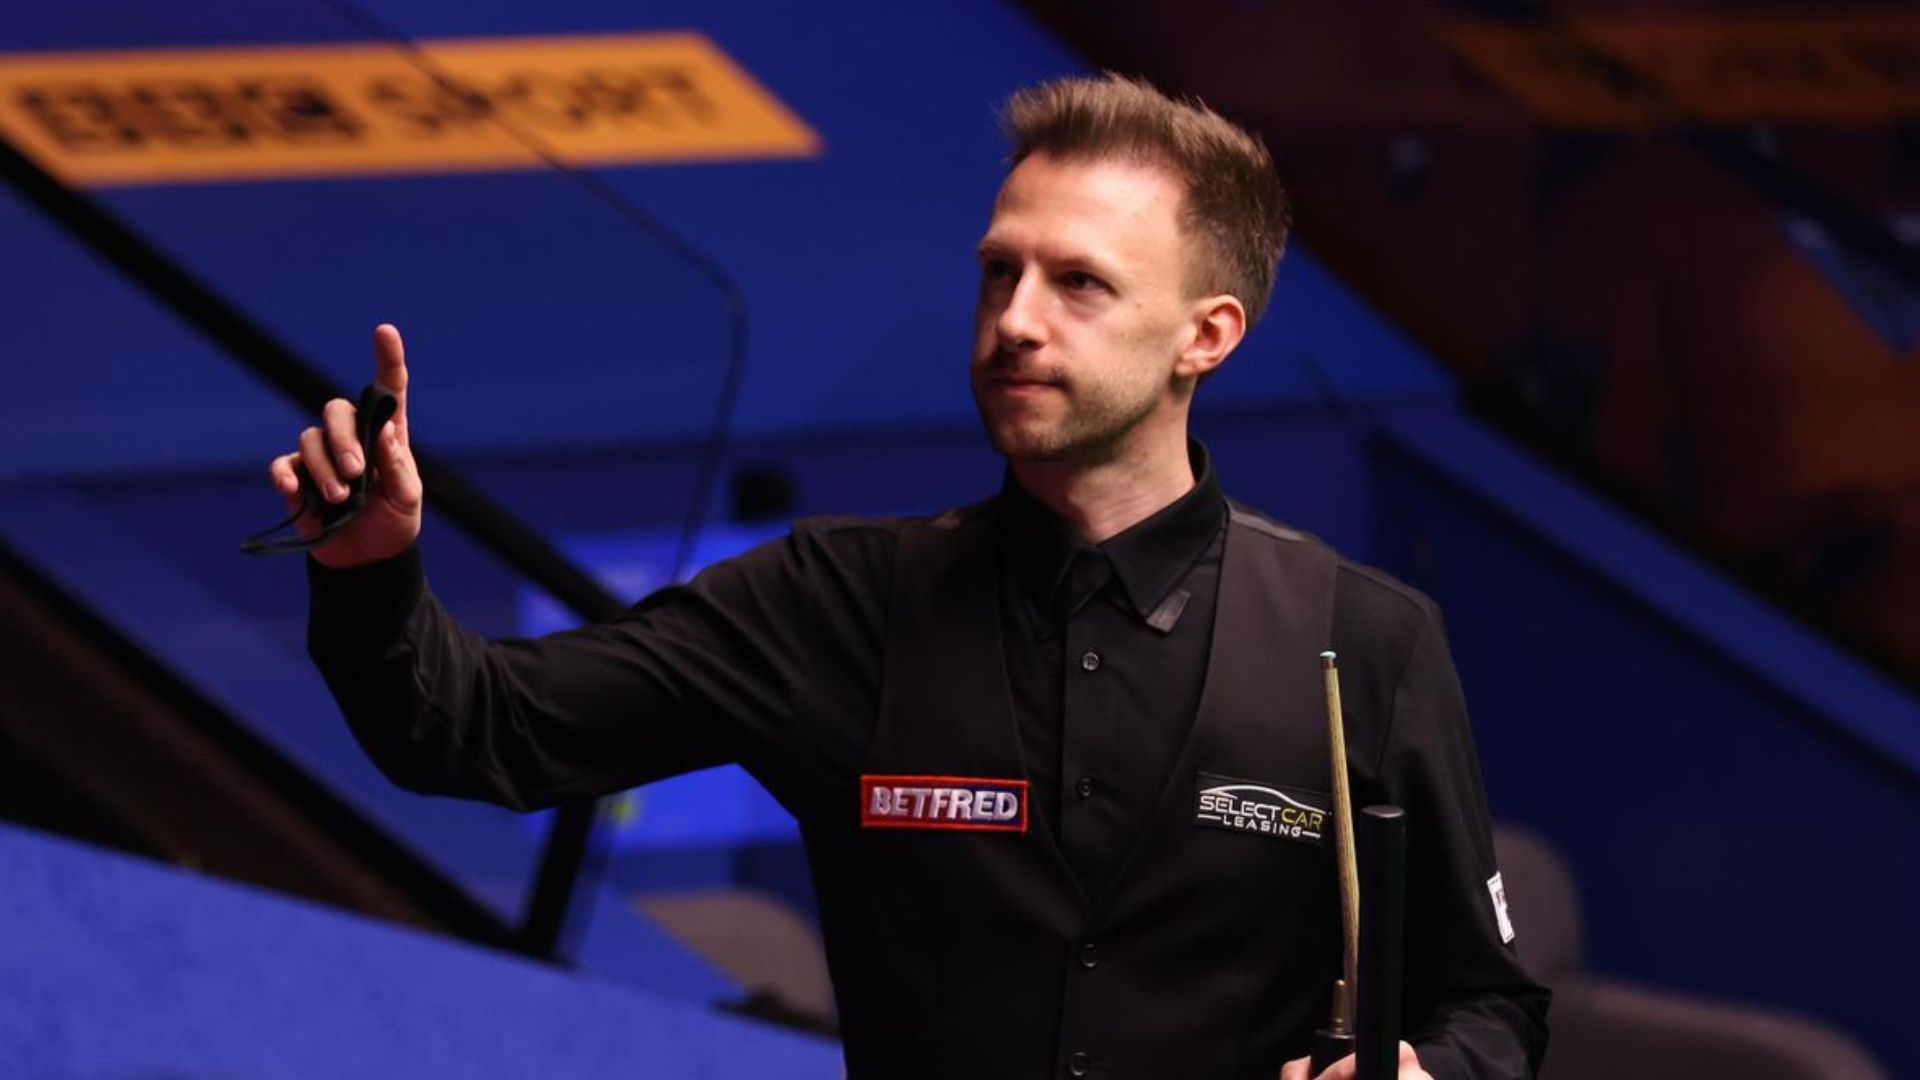 Judd Trump Posing In With One Hand In Air And Holding Snooker Stick In Other Hand